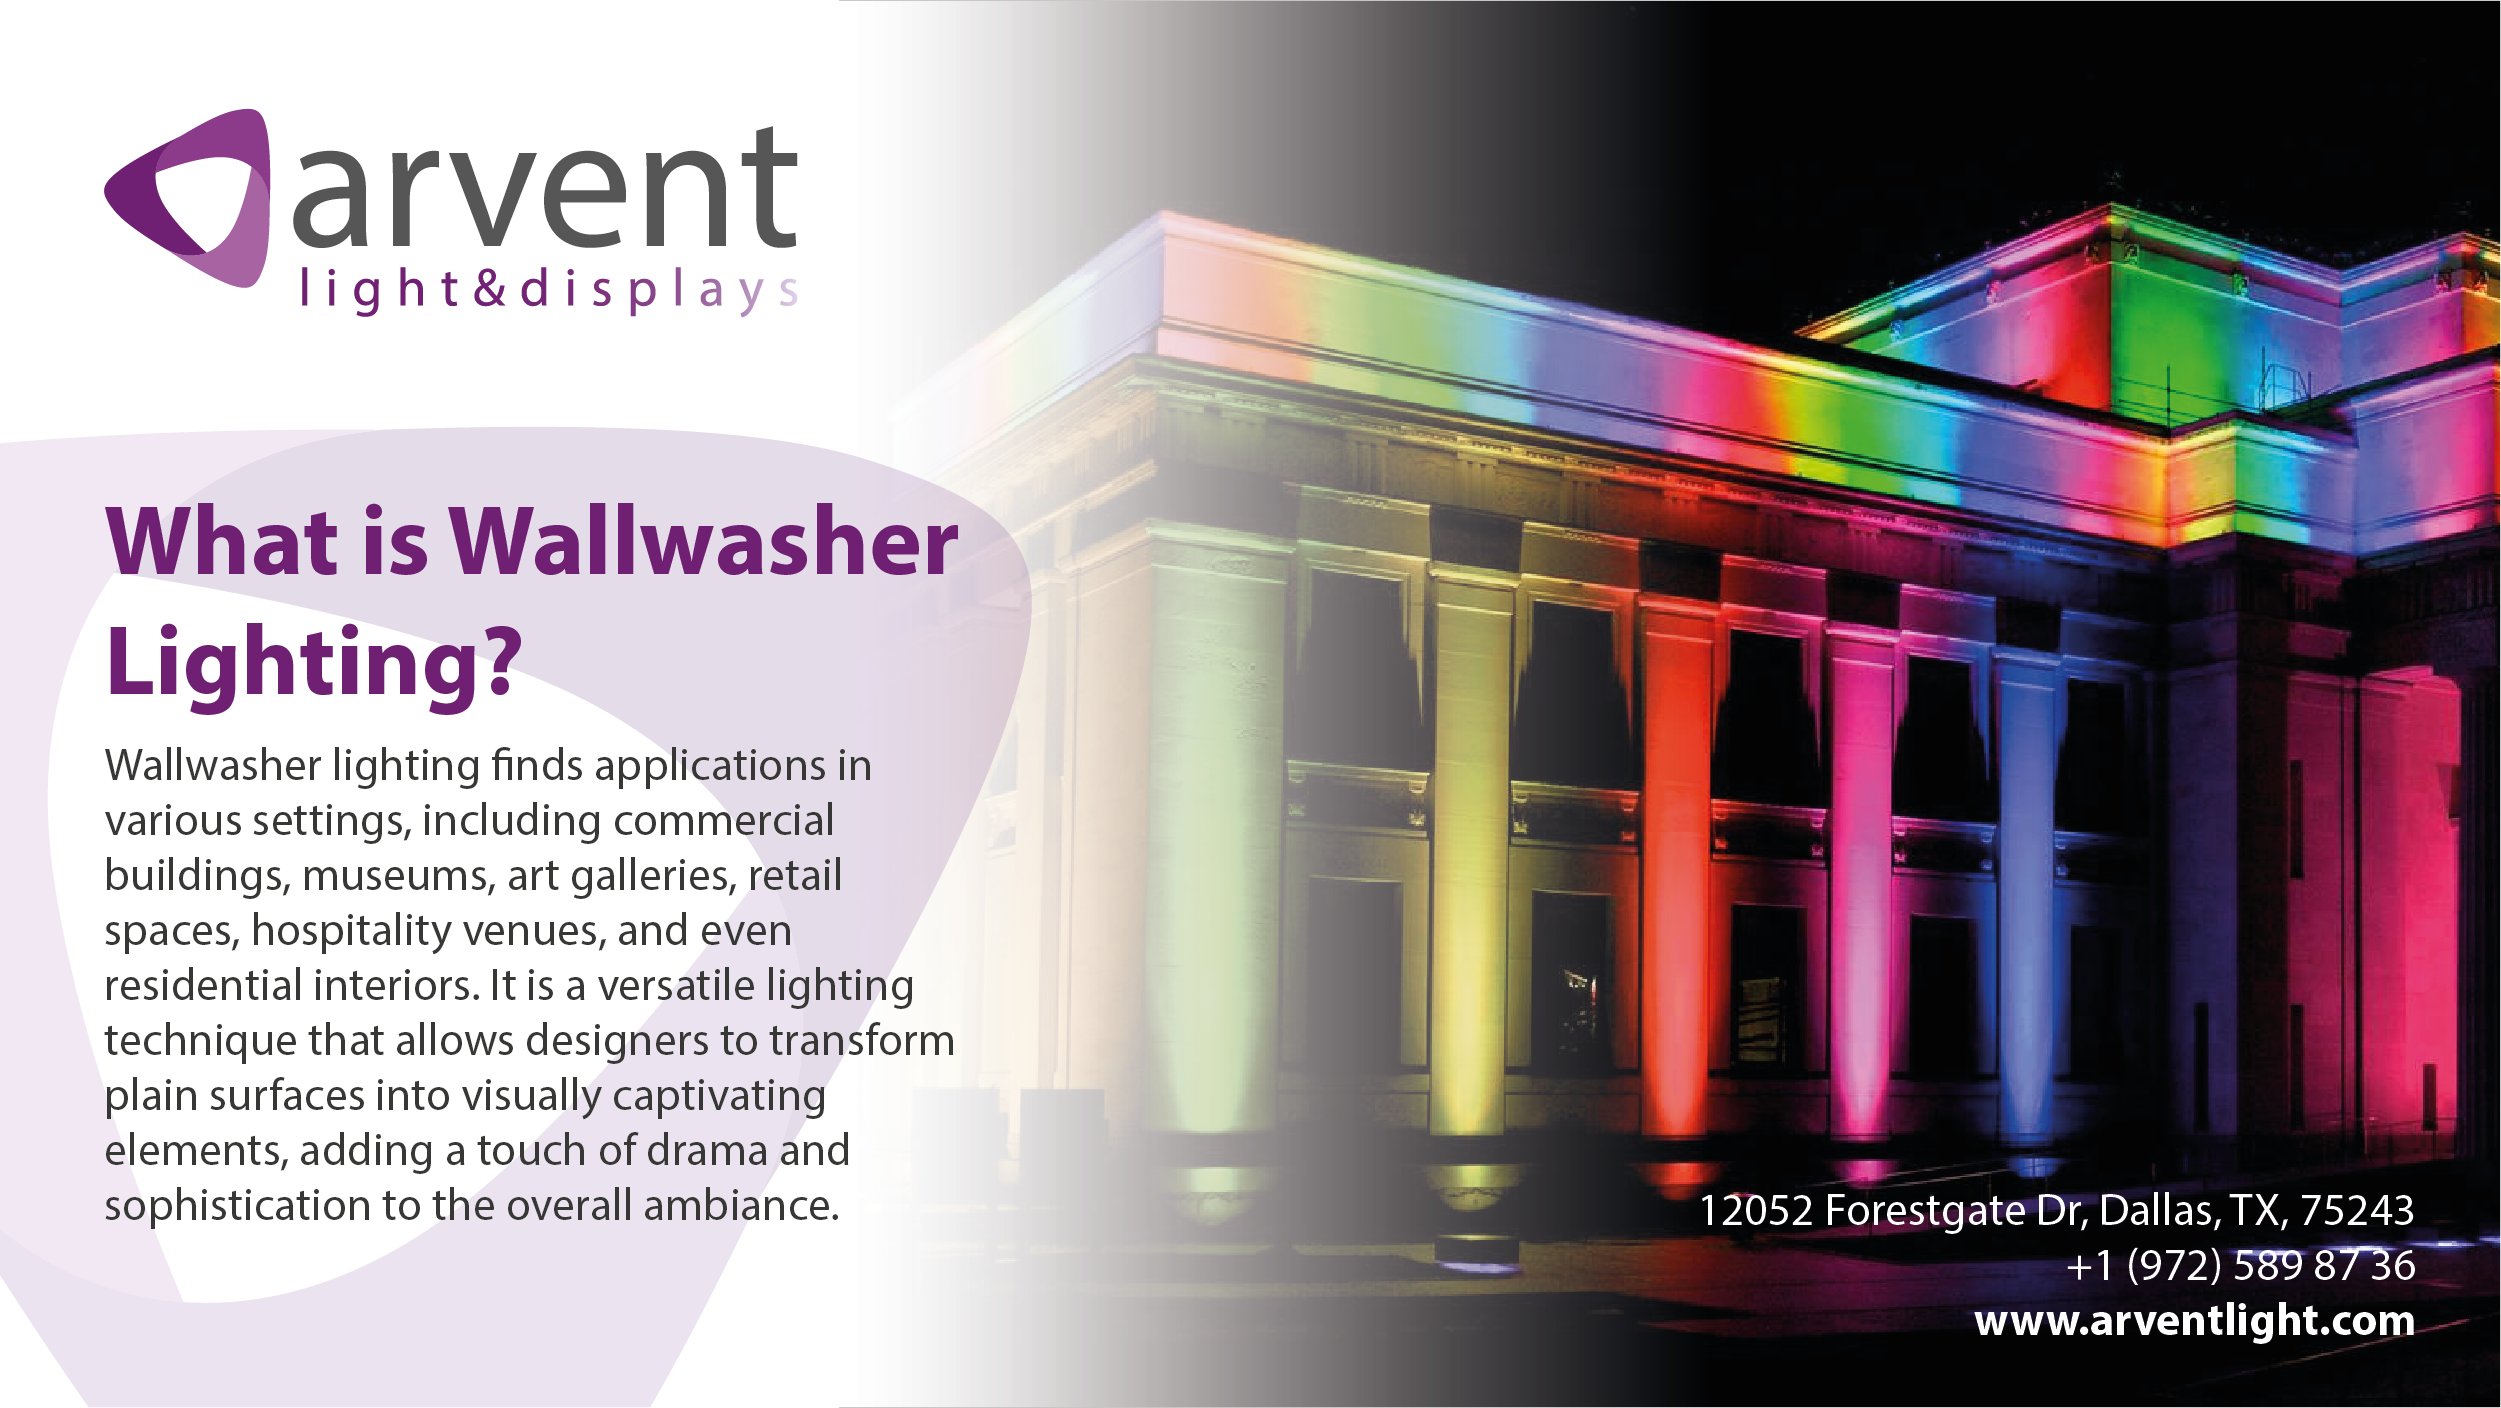 What Are the Wallwasher Lighting Options?, by Arvent Light